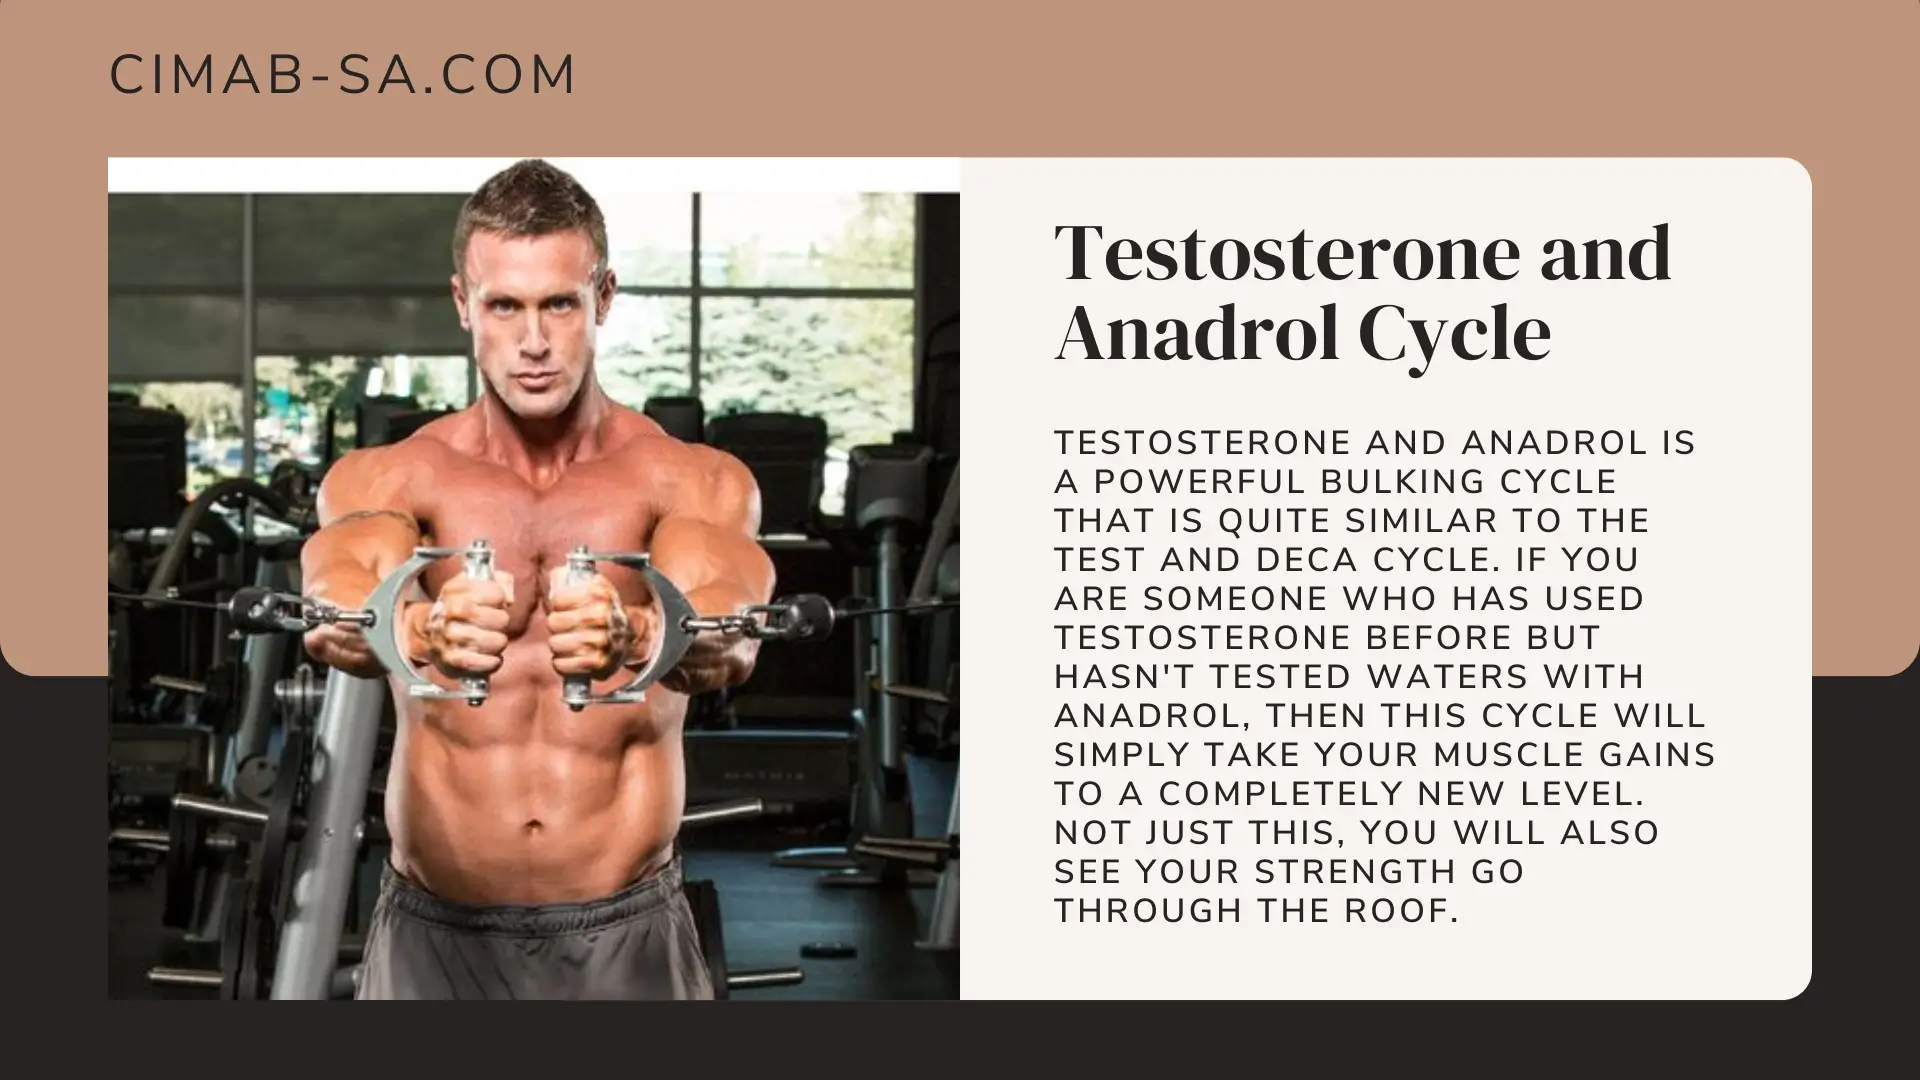 Test and Anadrol Cycle